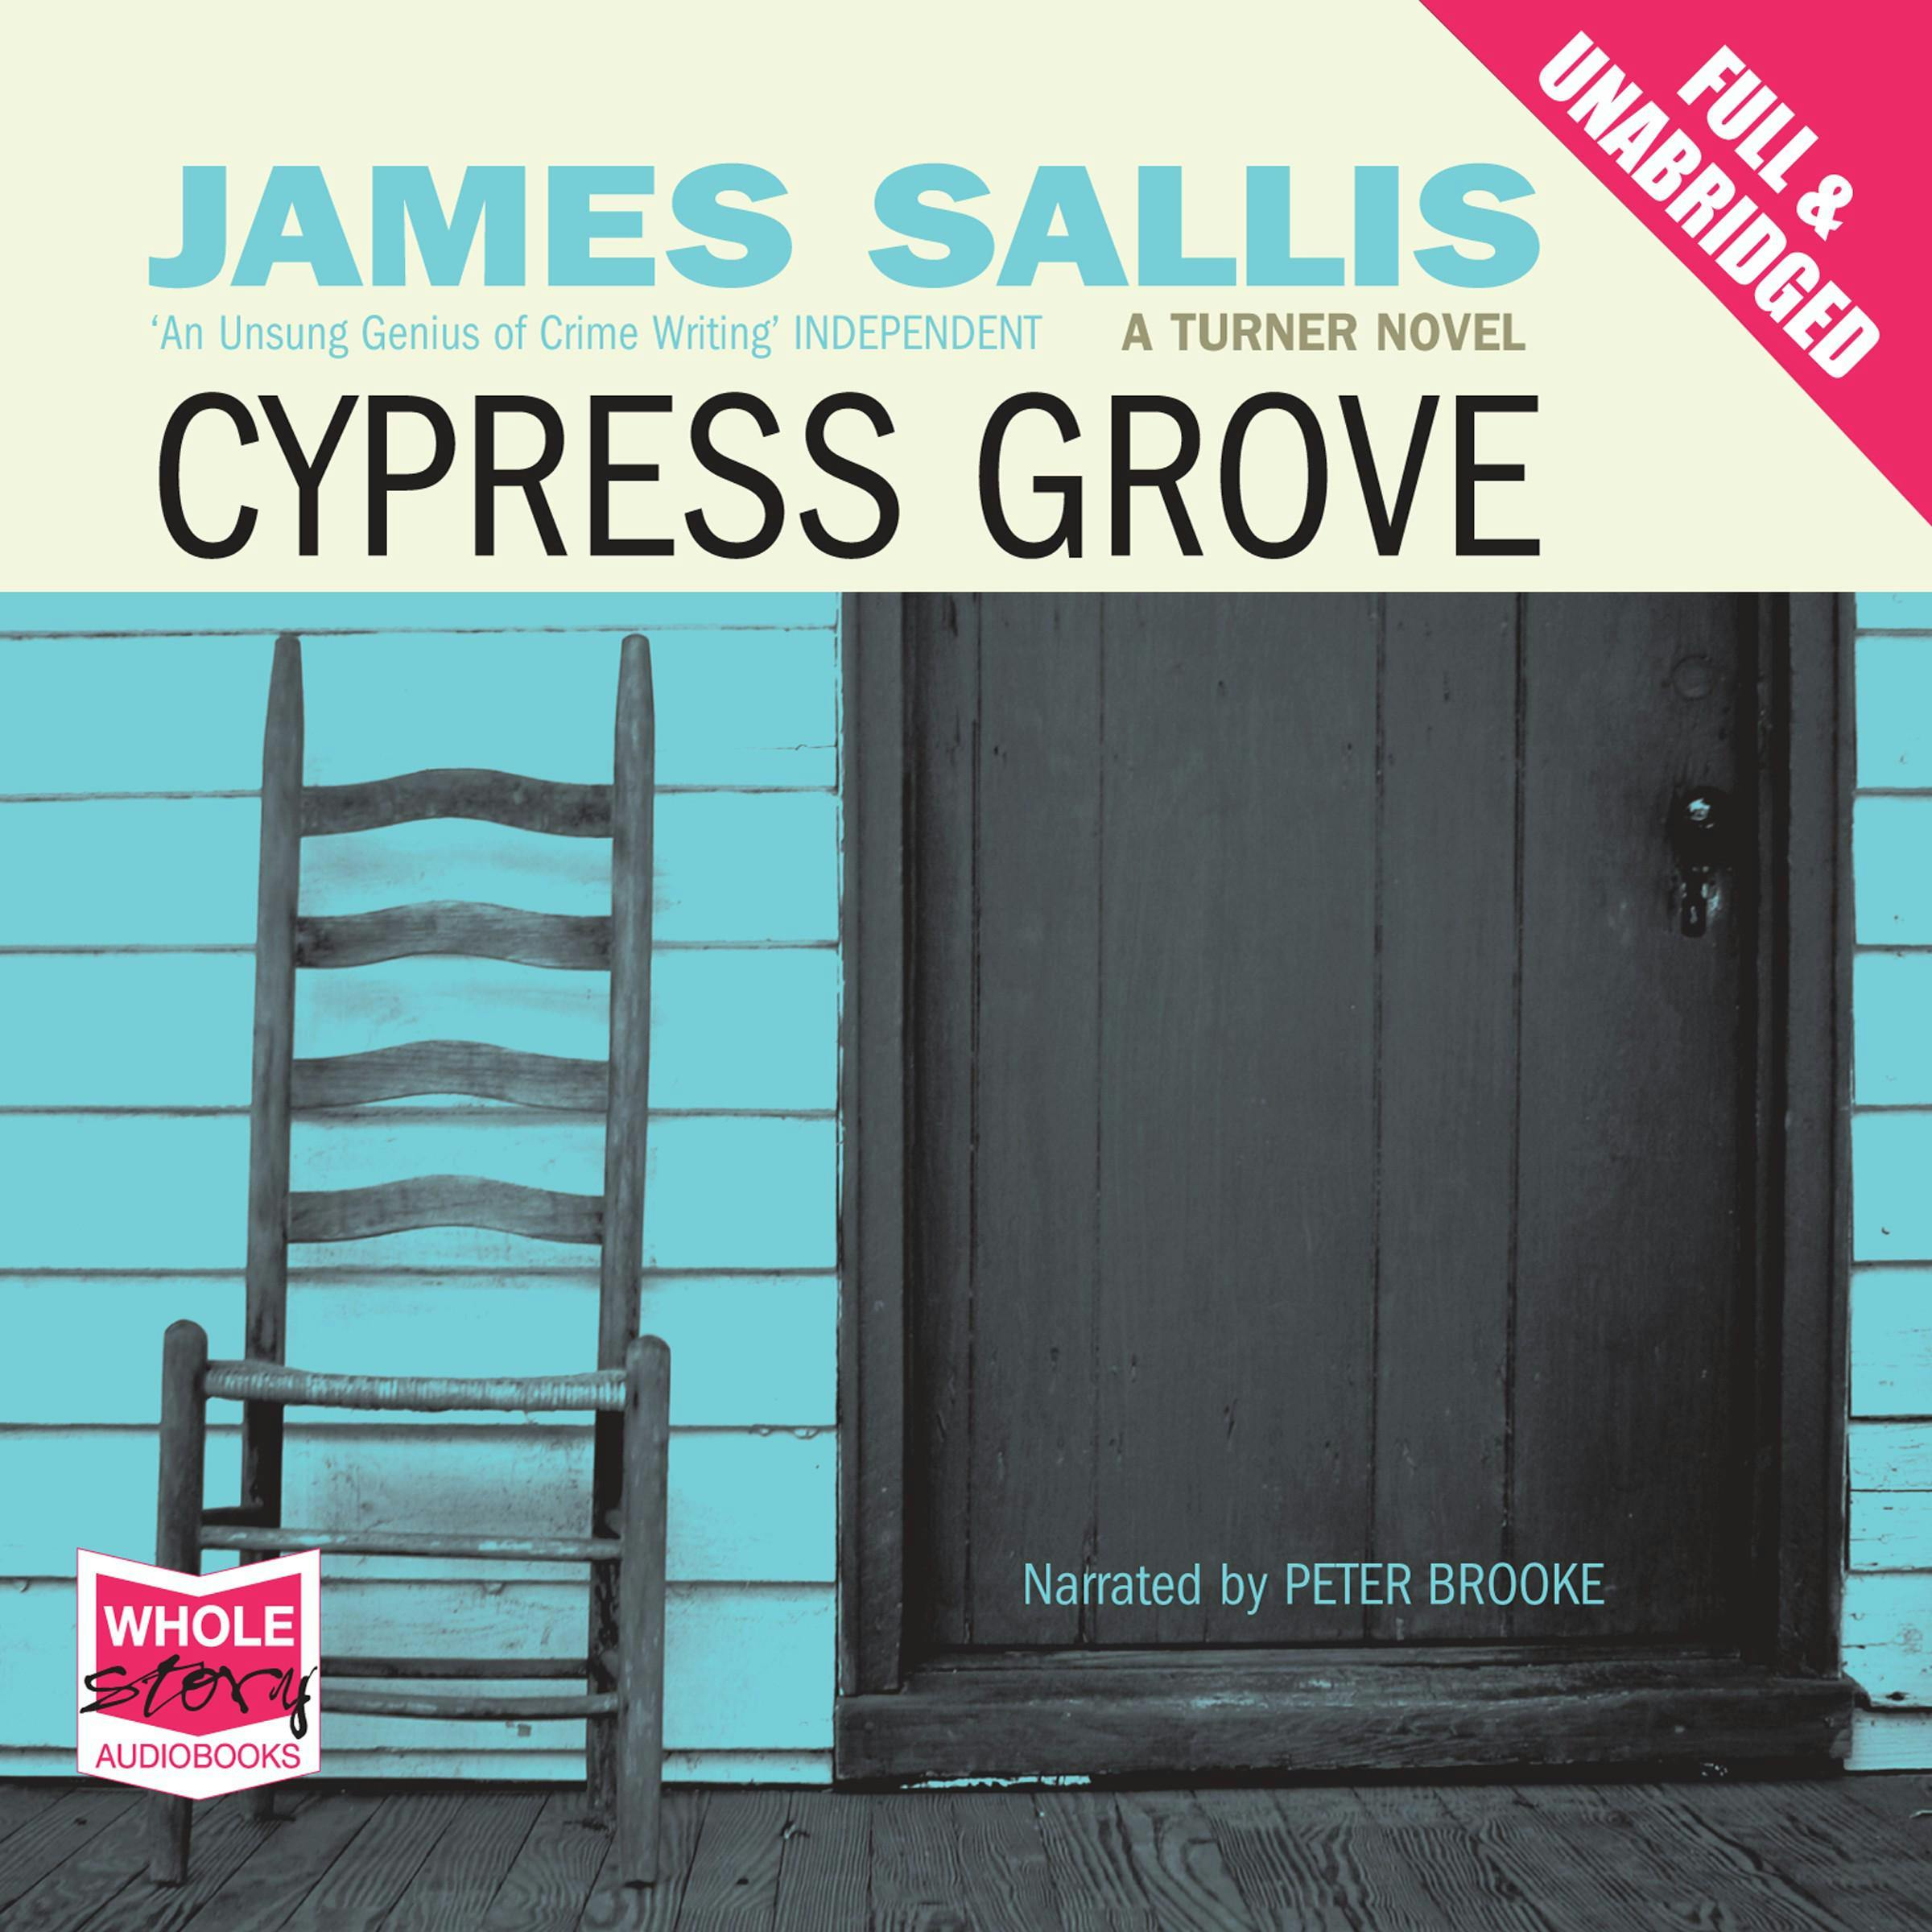 Cypress Grove - undefined